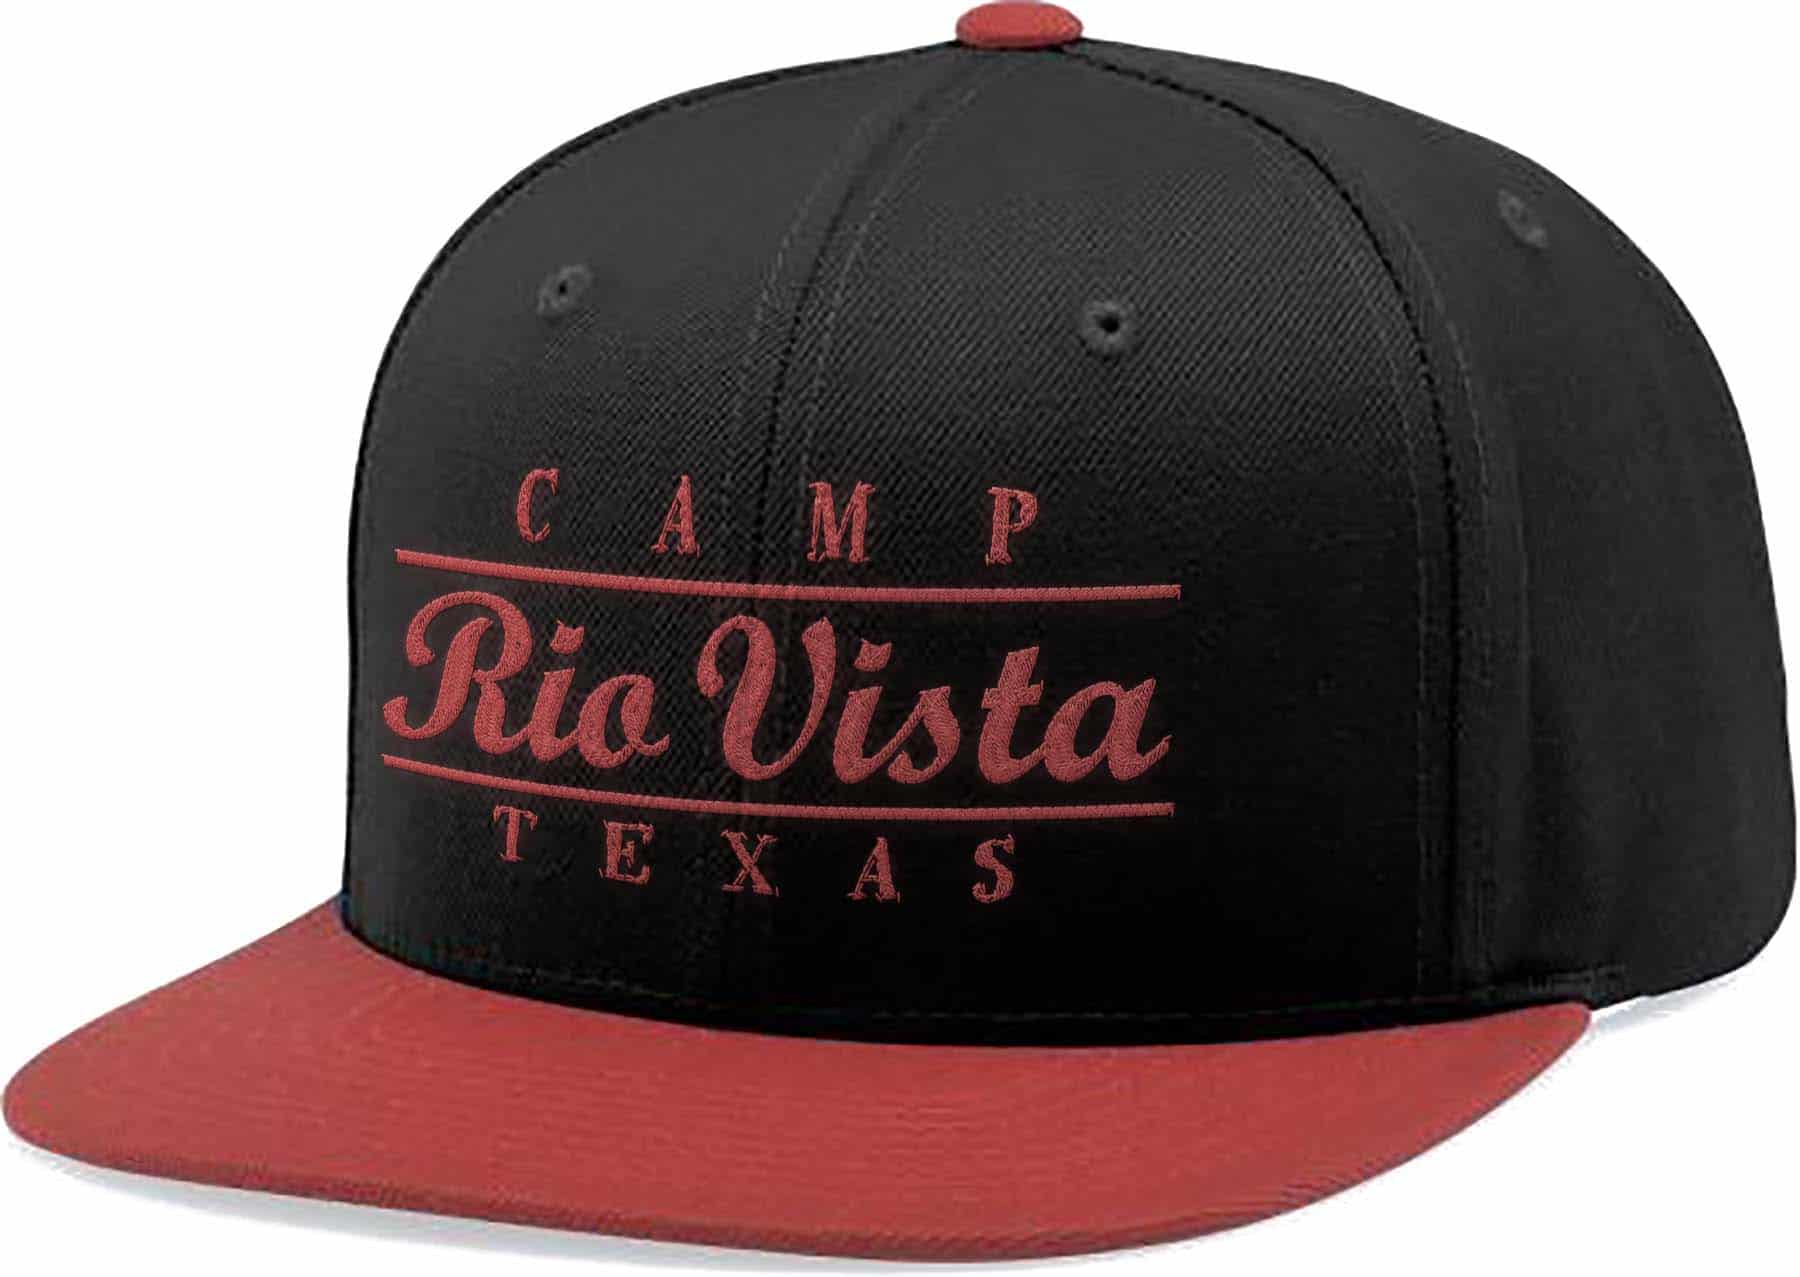 Image of a custom designed hat for summer camps to order